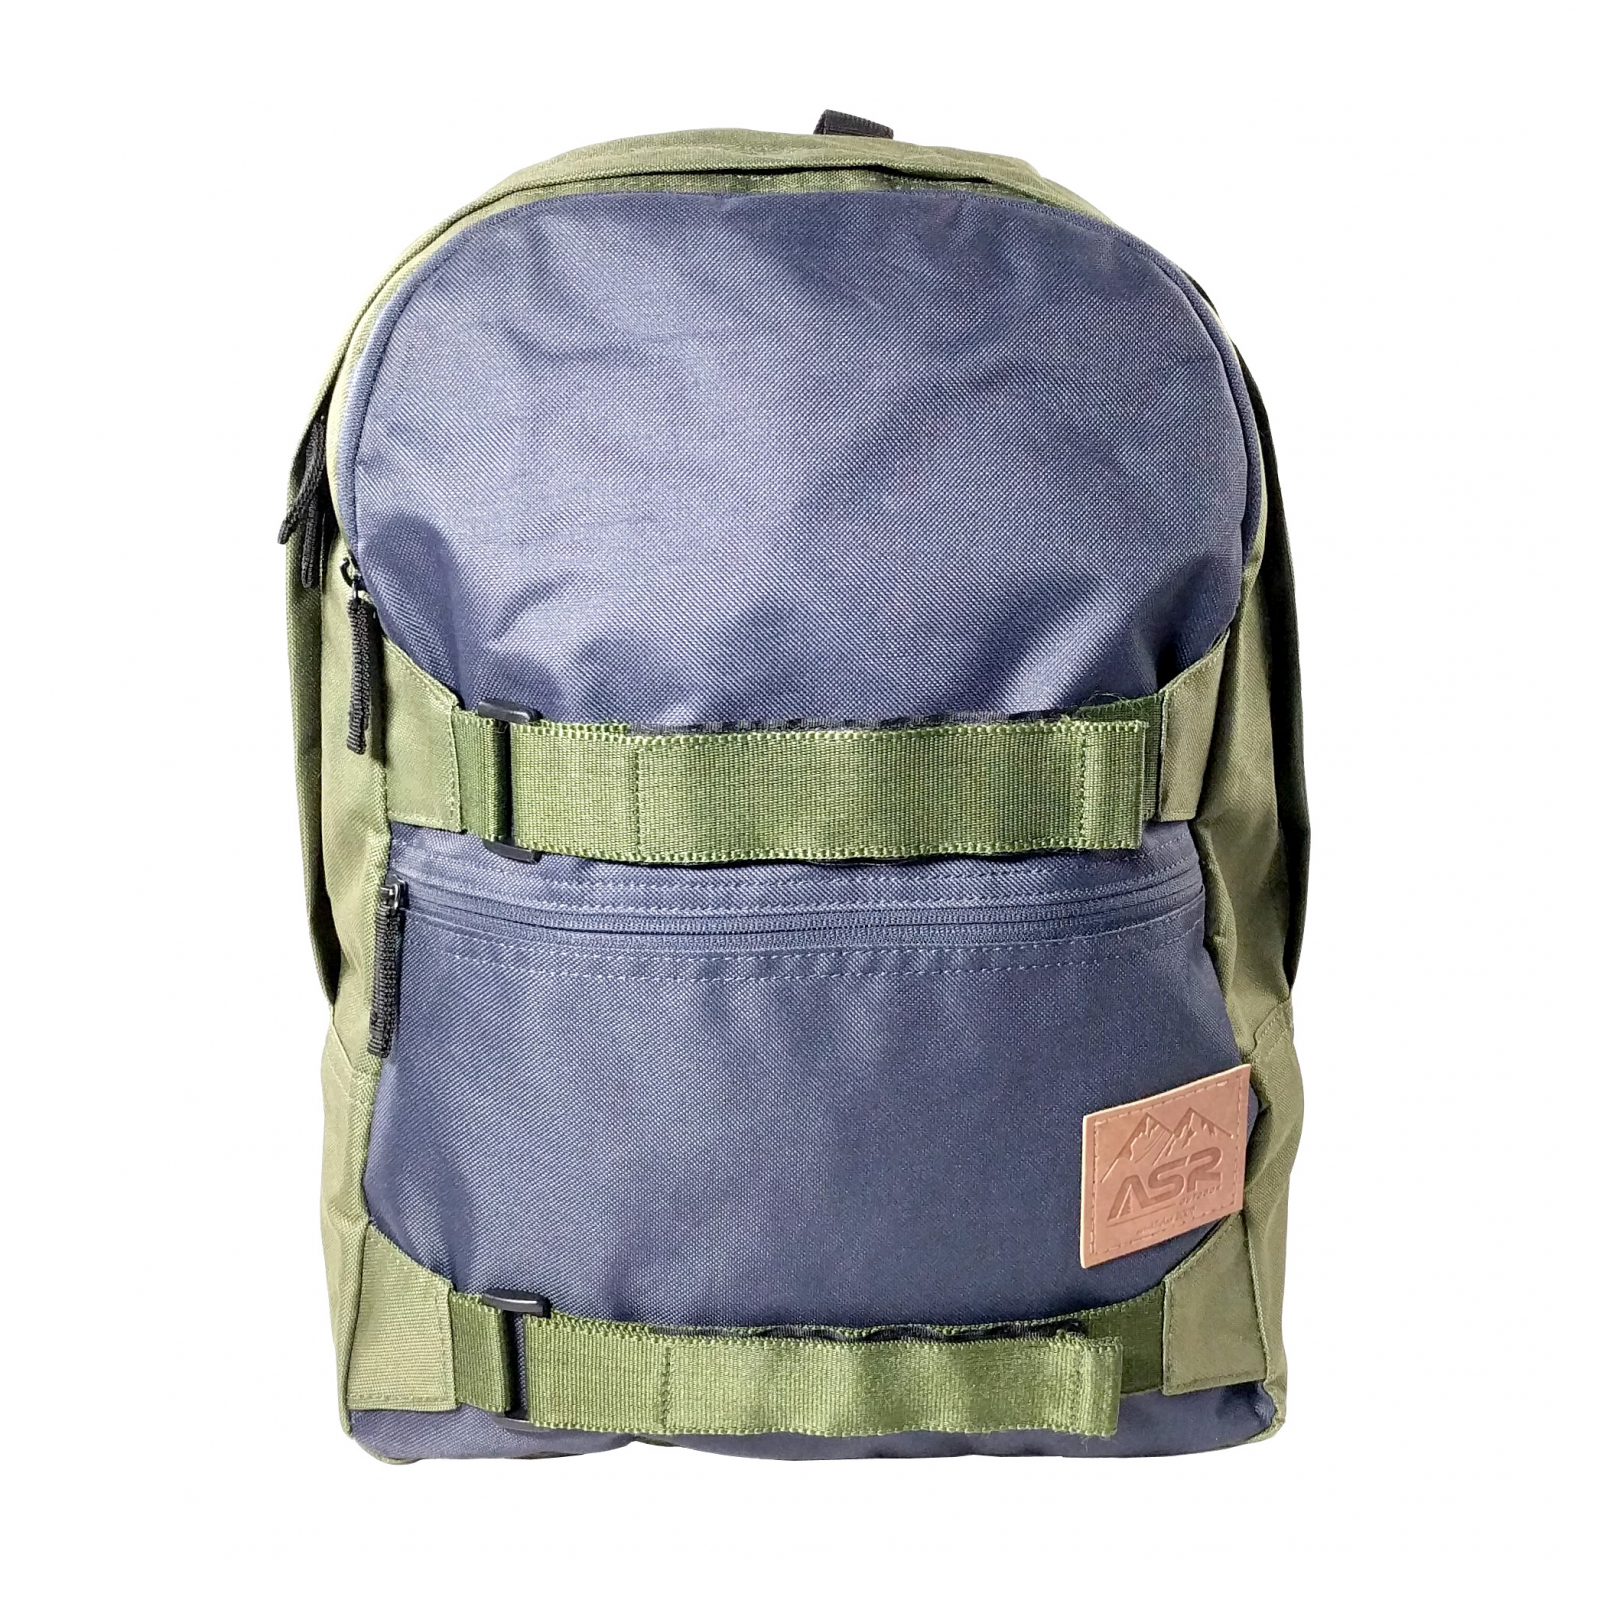 ASR Outdoor 19L Griptape Backpack Dual Zip Two Tone Navy OD Green - image 1 of 7